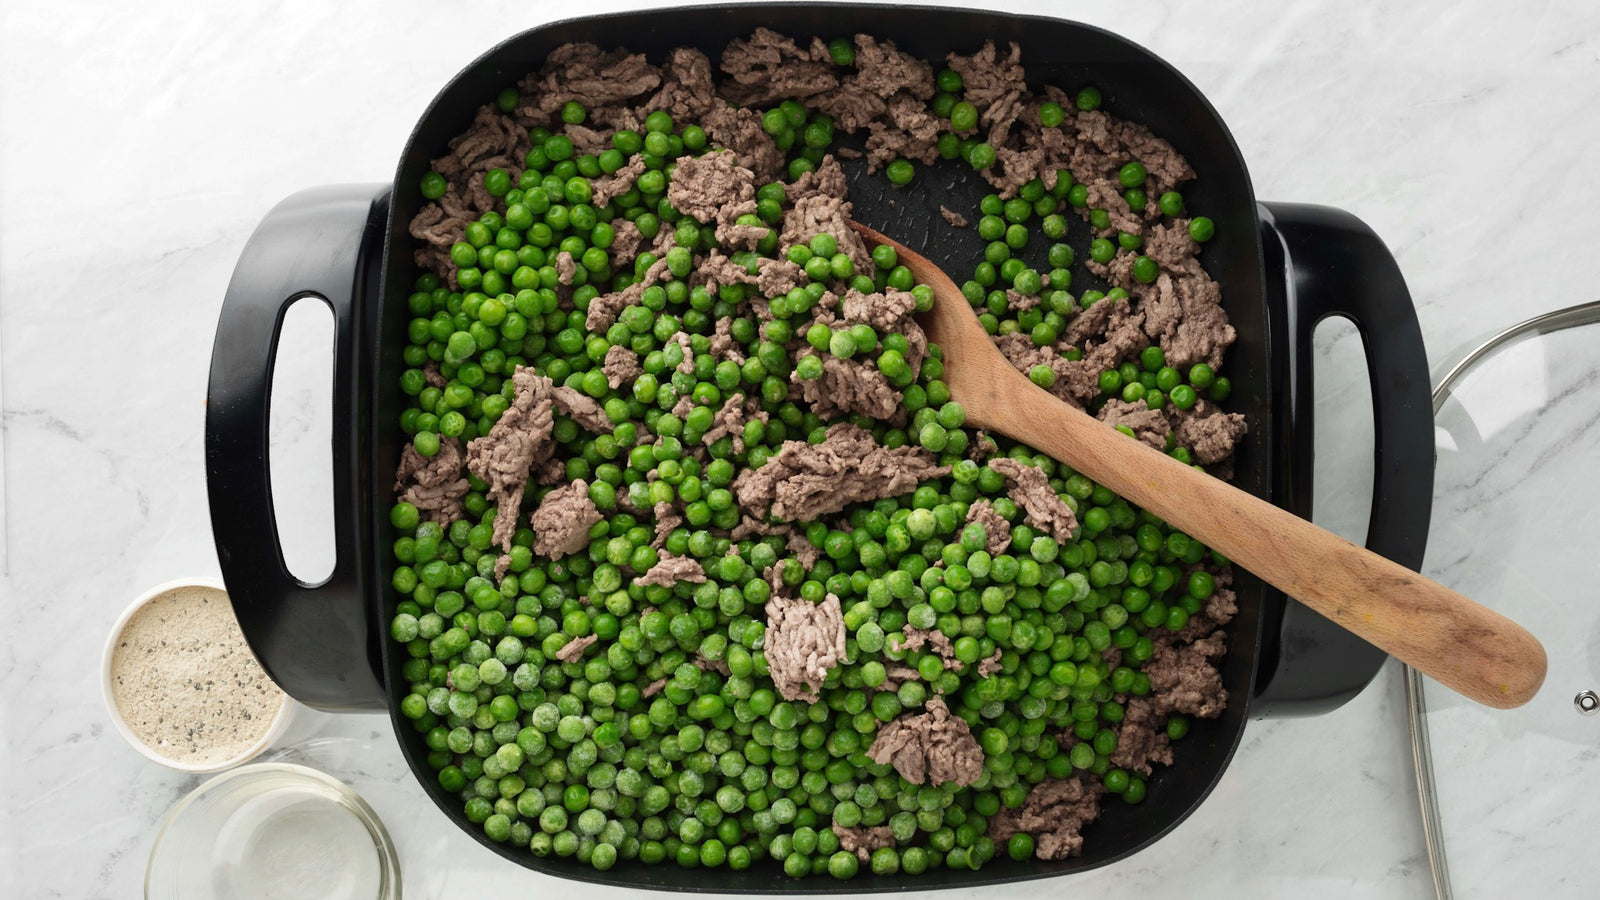 Homemade-Dog-Food-Recipe_Cooking_Peas_for_Dogs